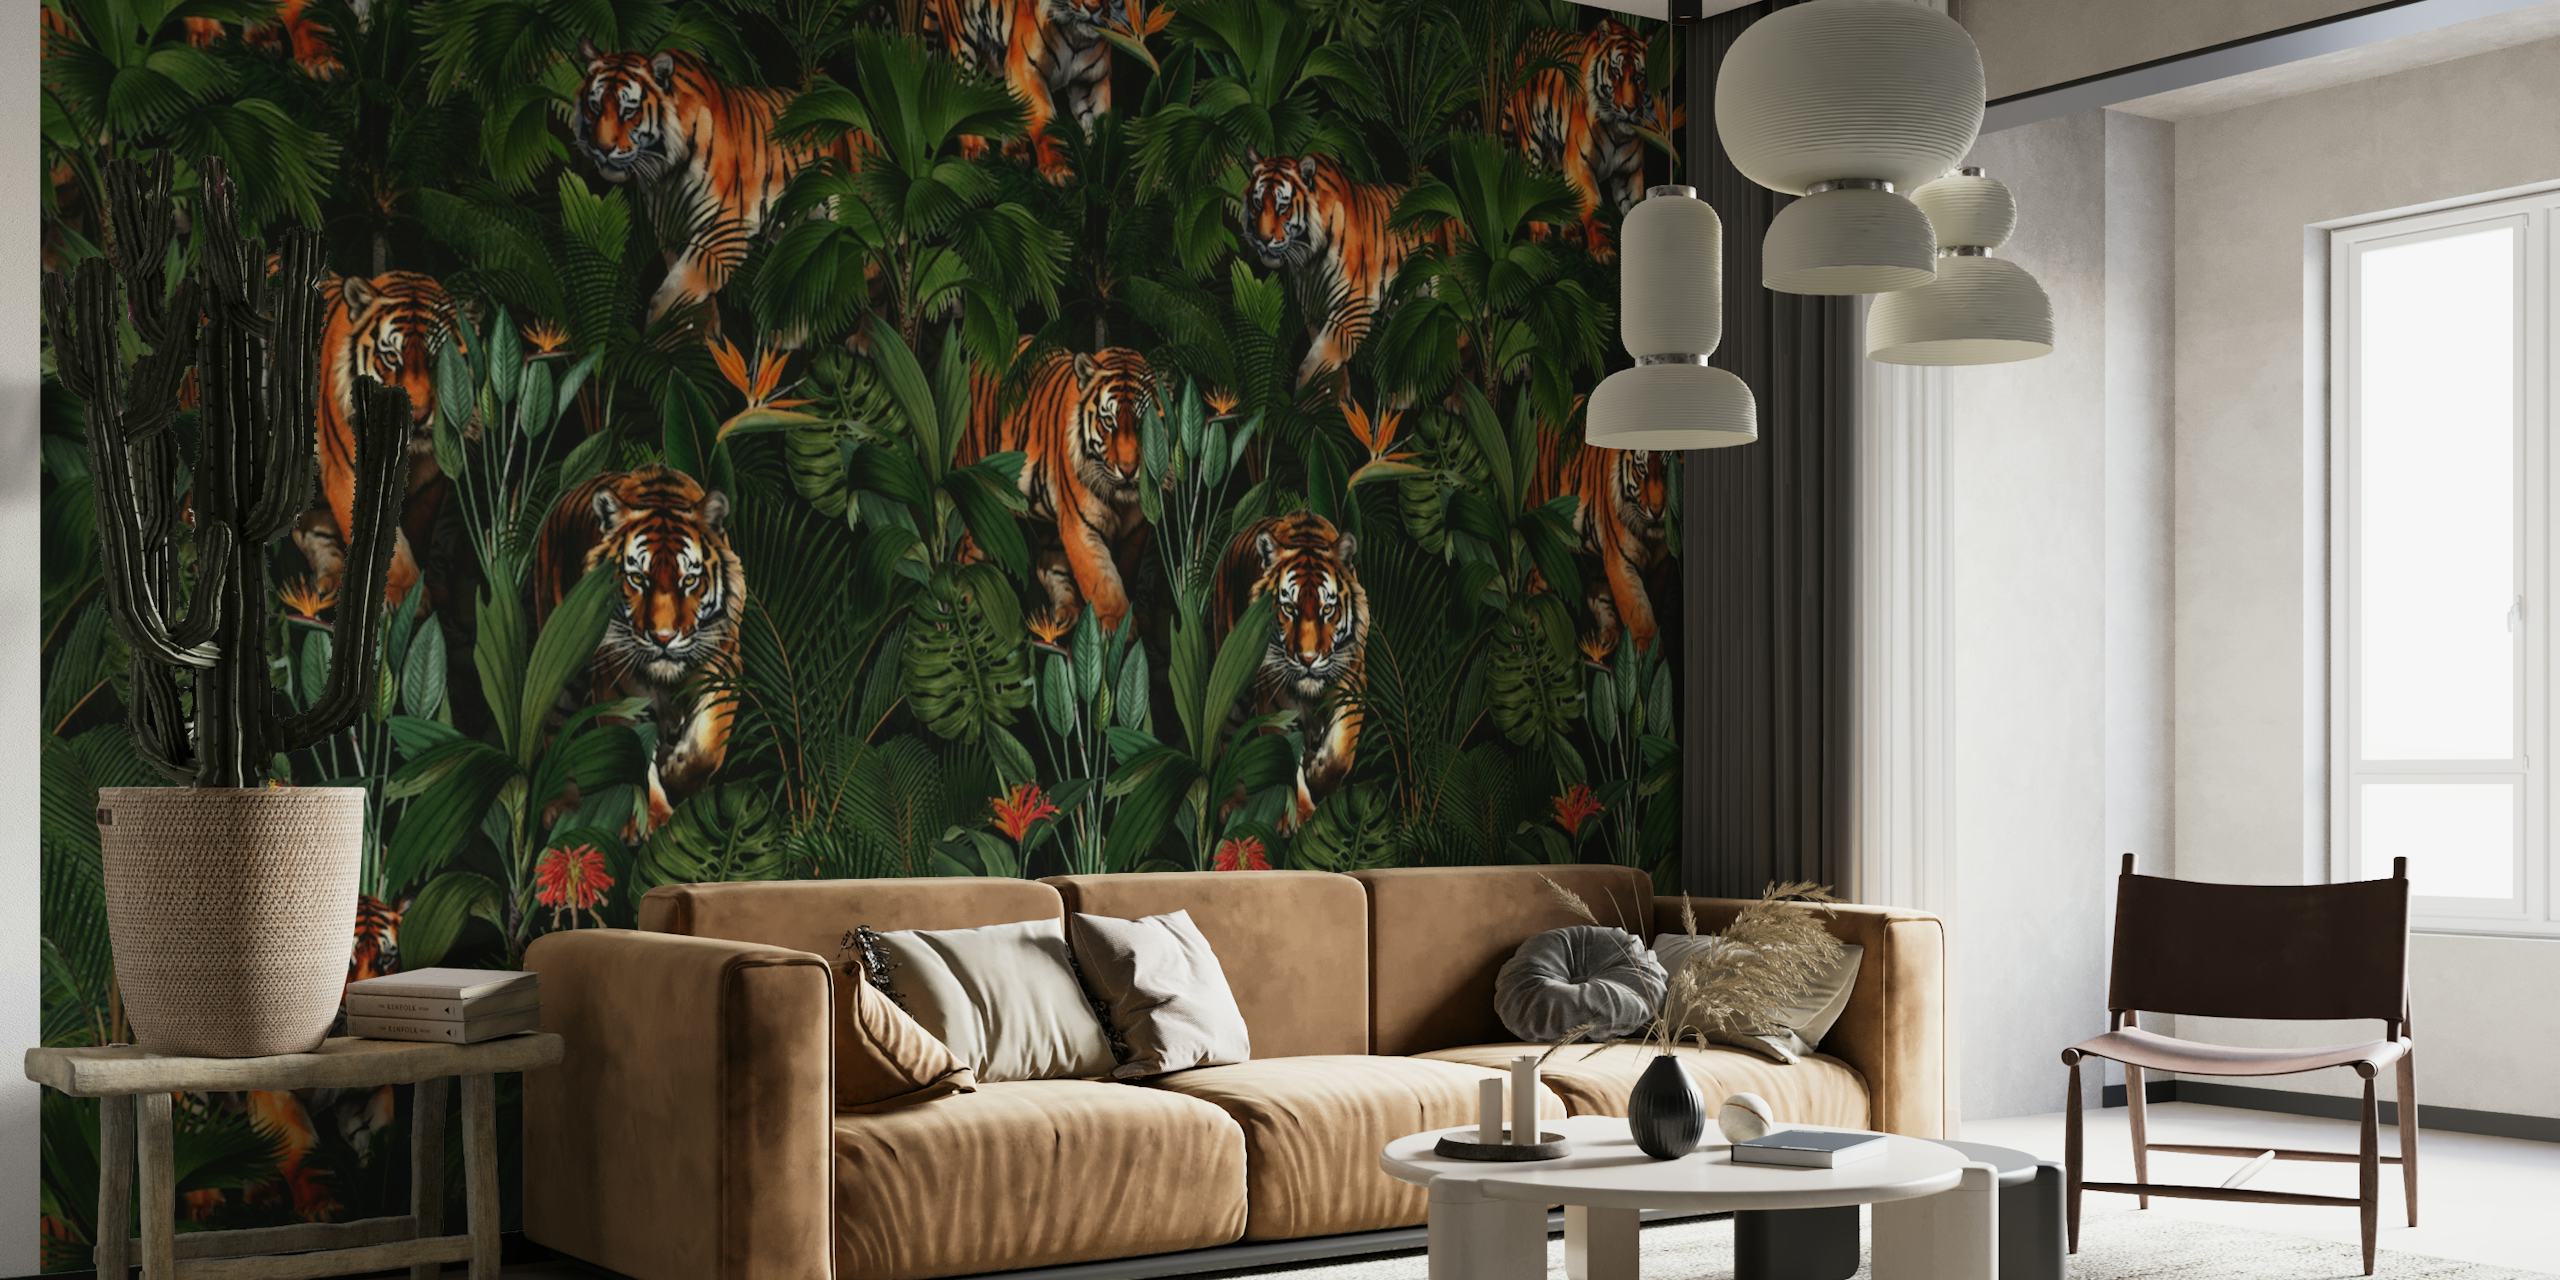 Lush jungle at night wall mural with tigers and tropical plants